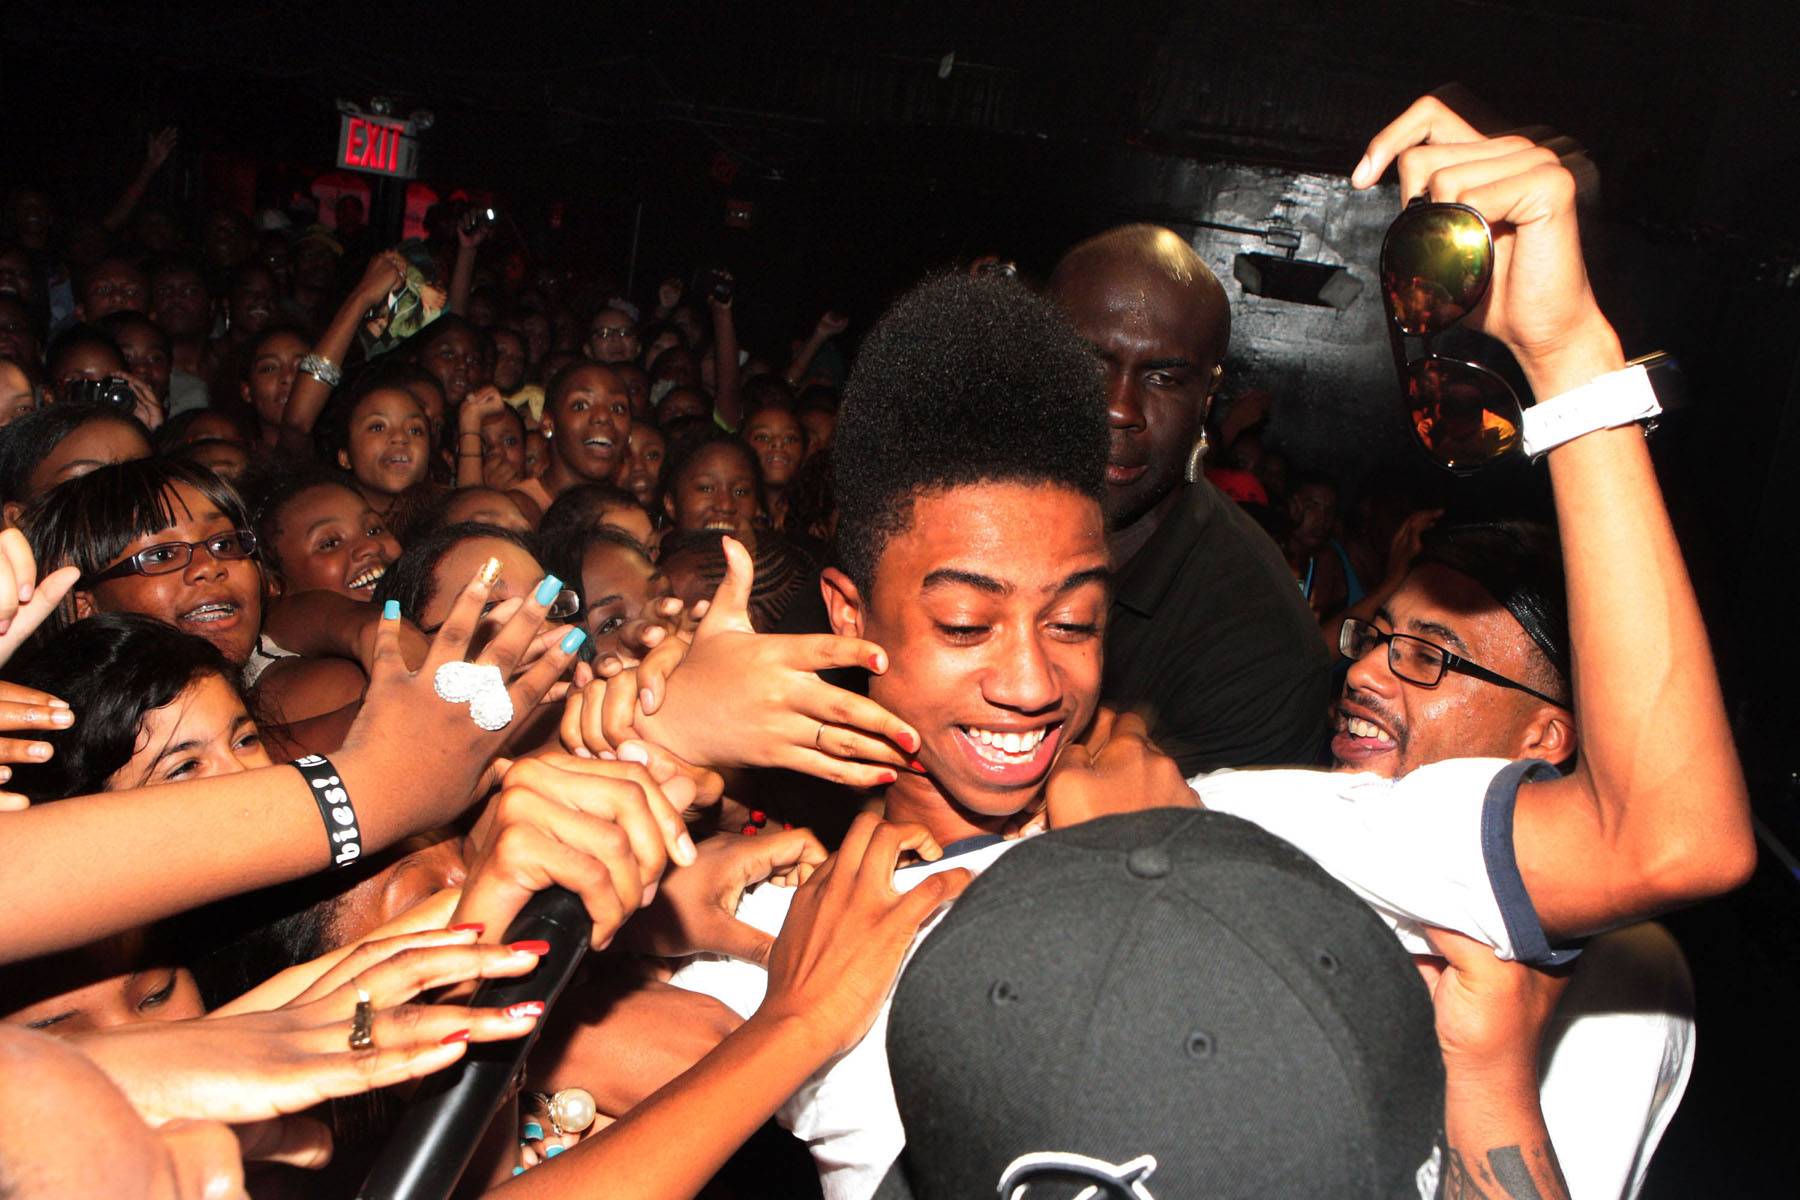 Lil Twist - Lil' Twist kicks it with fans before taking the stage at the Closer To My Dreams Tour.Irving Plaza July 28, 2011 in New York City. (Photo by Terrence Jennings/PictureGroup)